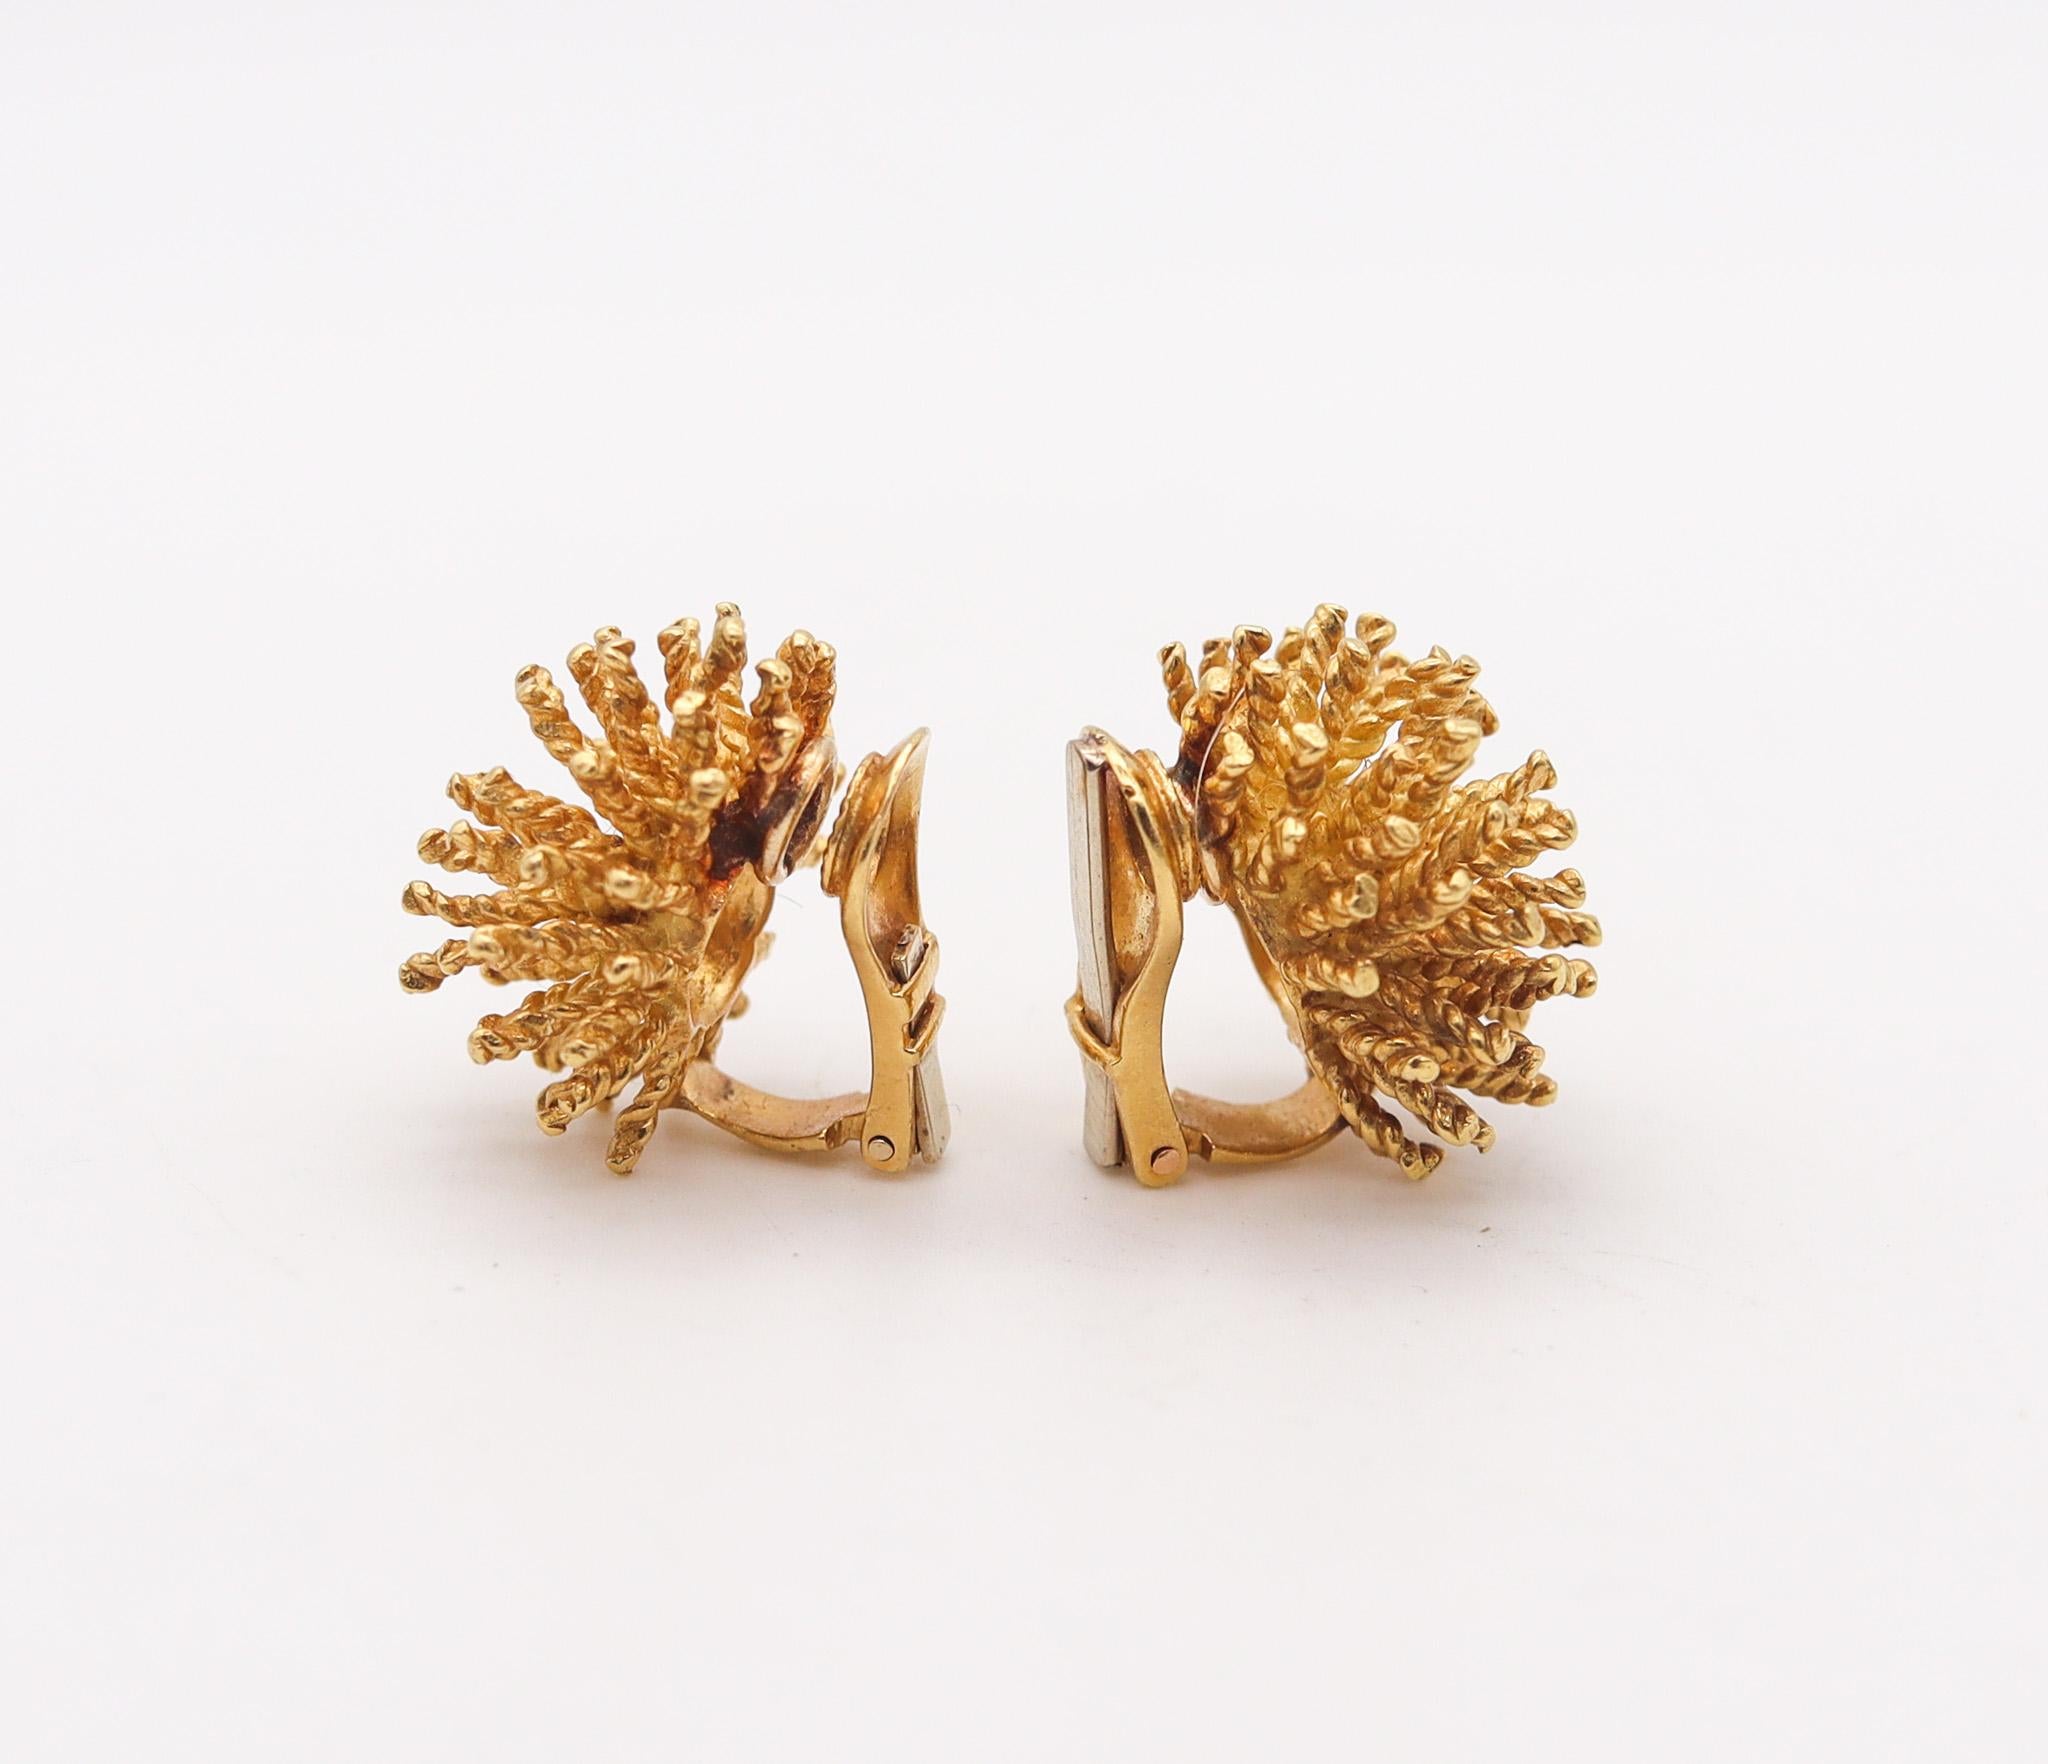 Clips-on earrings designed by Tishman & Lipp.

Very unusual pair of clips-on earrings created in New York city, by the jewelry company of Tishman & Lipp, back in the 1960. These pair has been crafted with multiples spikes as a sputnik made up from